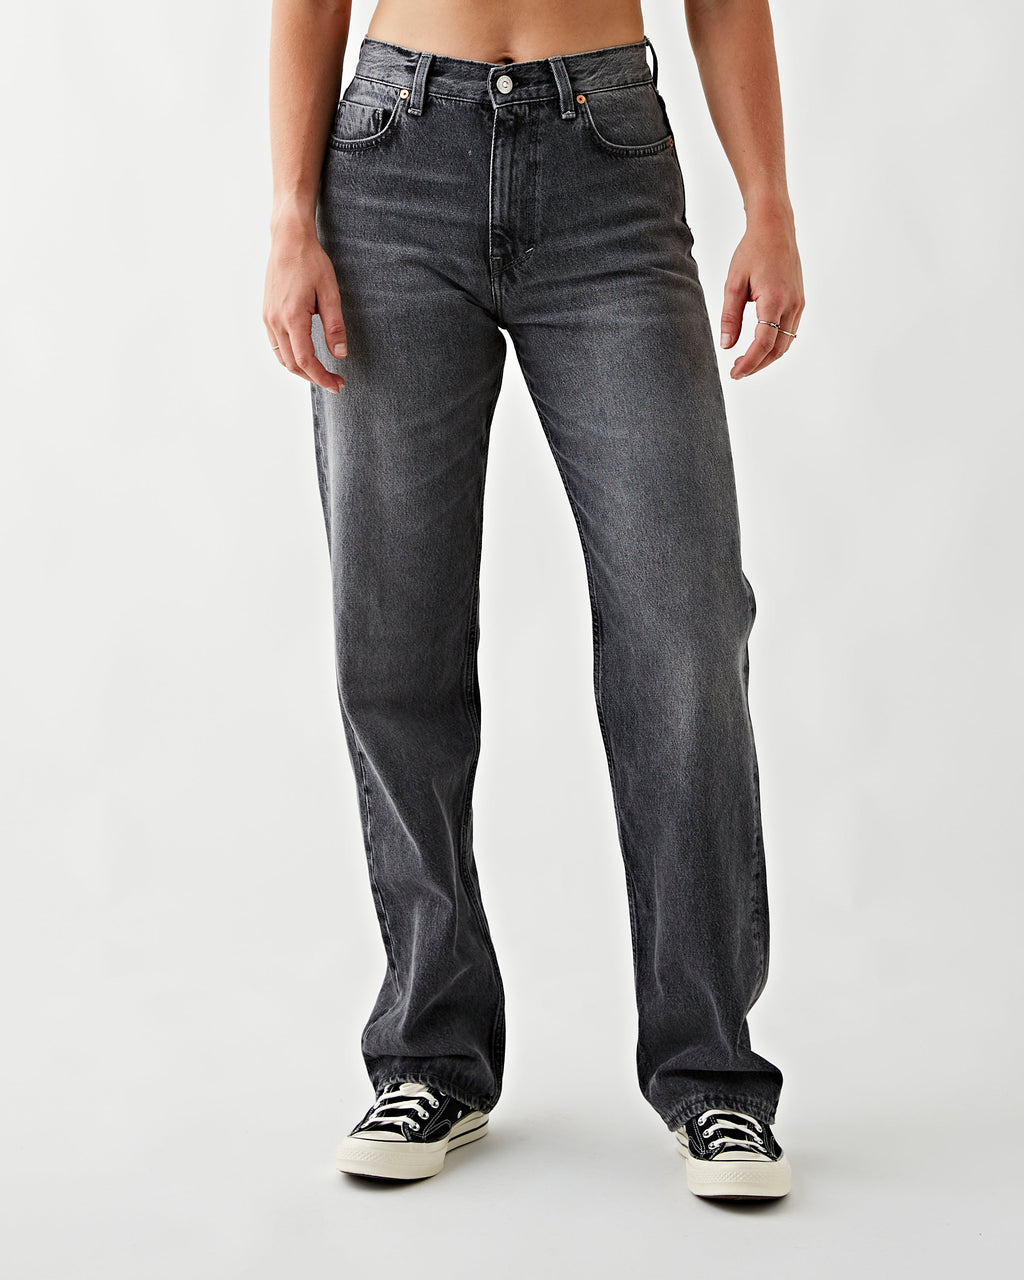 Women's Jeans, Shop Straight Leg Jeans and More